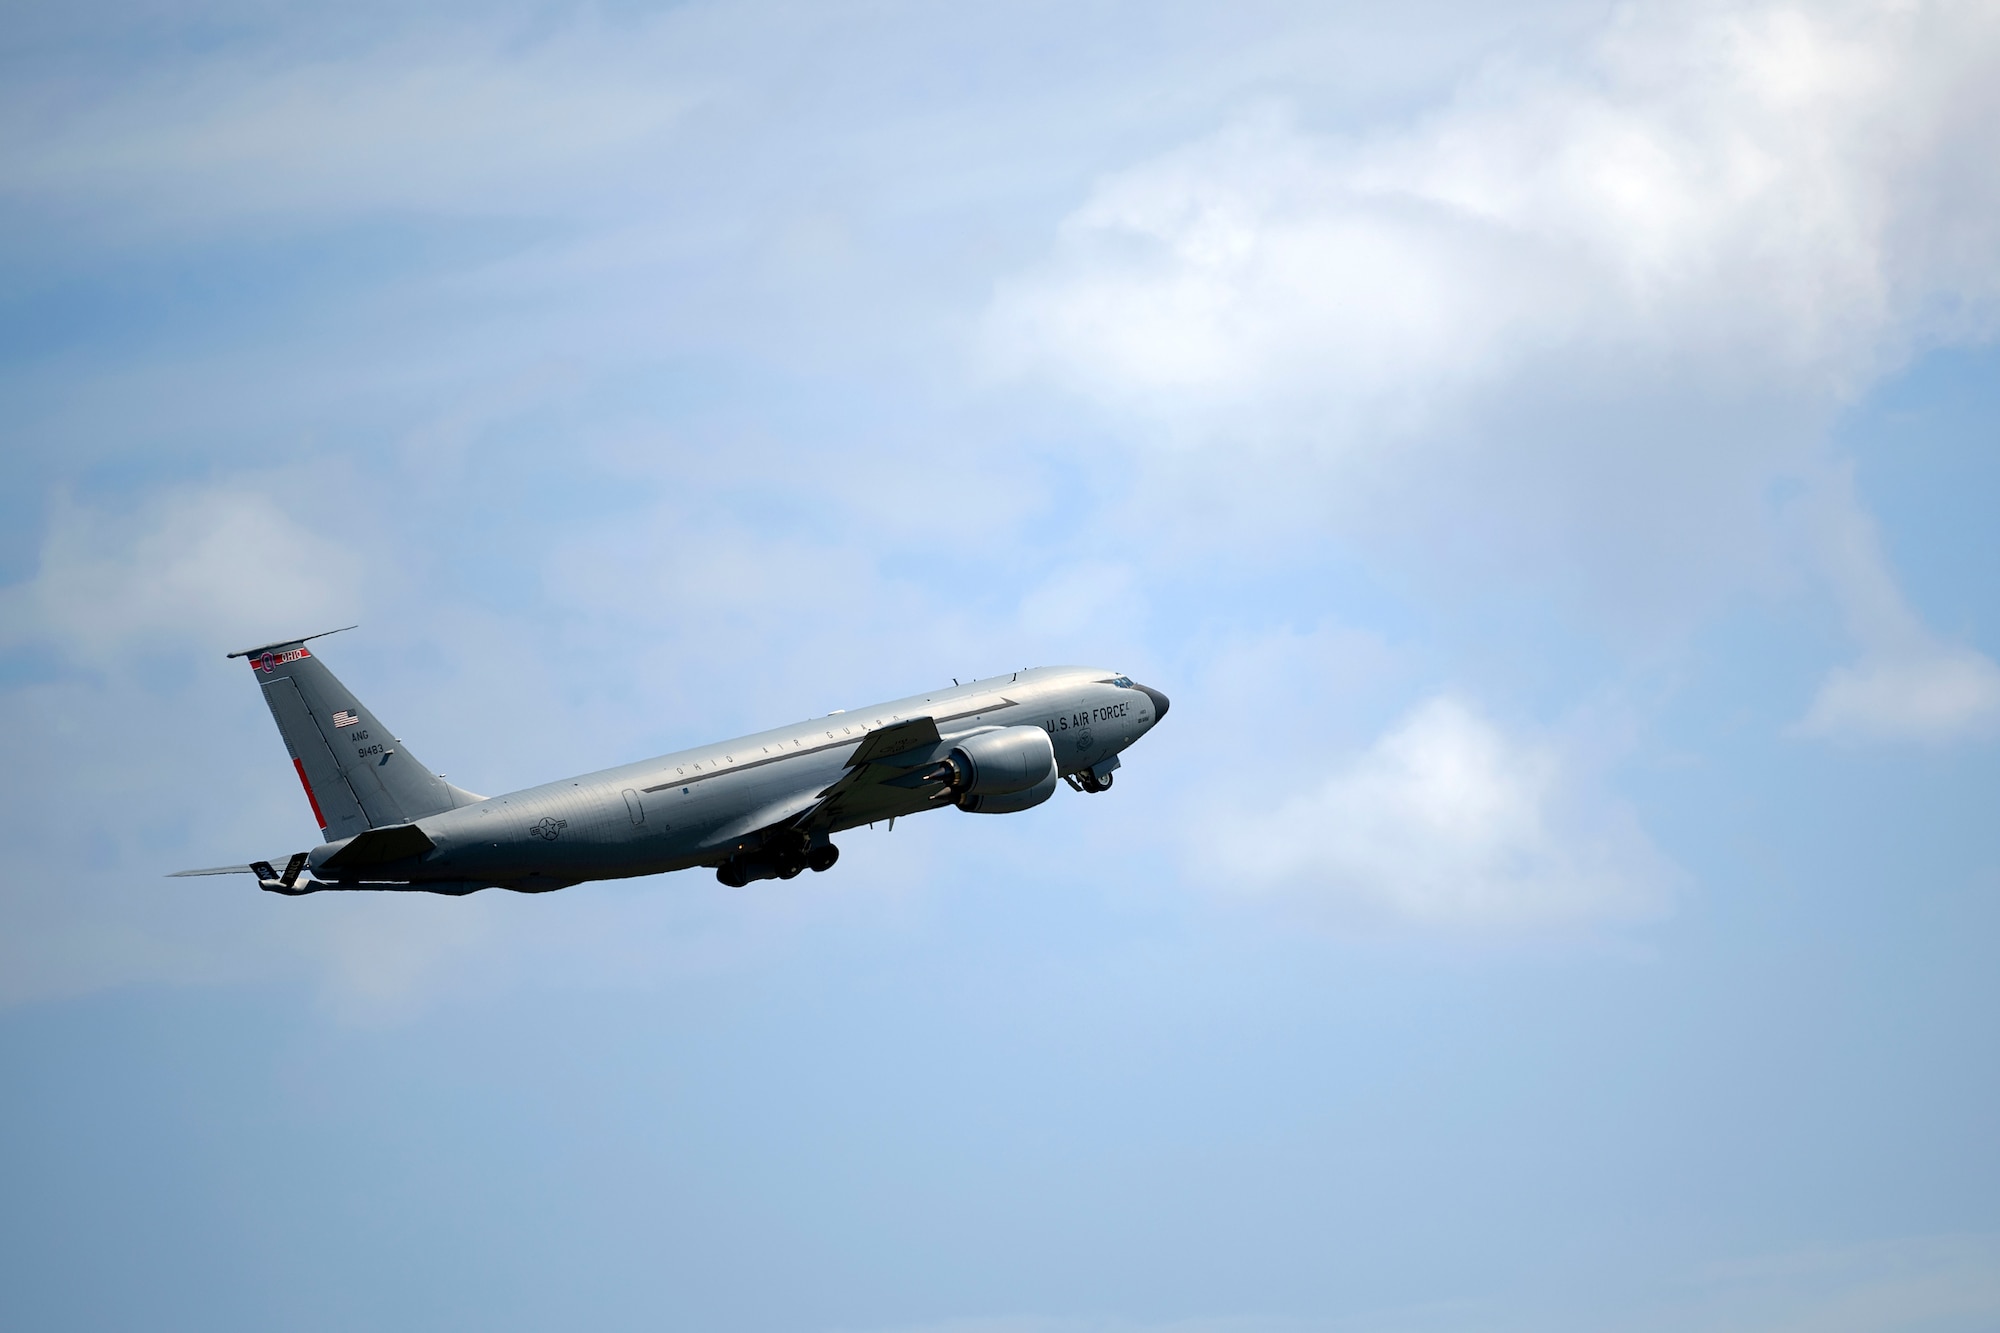 A KC-135 Stratotanker assigned to the 121st Air Refueling Wing, Ohio Air National Guard, departs the 156th Wing airfield during Operation Hoodoo Sea exercise at Muñiz Air National Guard Base, Carolina, Puerto Rico, May 4, 2023. Operation Hoodoo Sea is a multi-unit training exercise where participant units conduct agile combat training in the coastal southeast of the U.S. to test agile communications innovations, portable aerospace ground equipment, aircraft concealment hangars and survival kits. (U.S. Air National Guard photo by Master Sgt. Rafael Rosa)